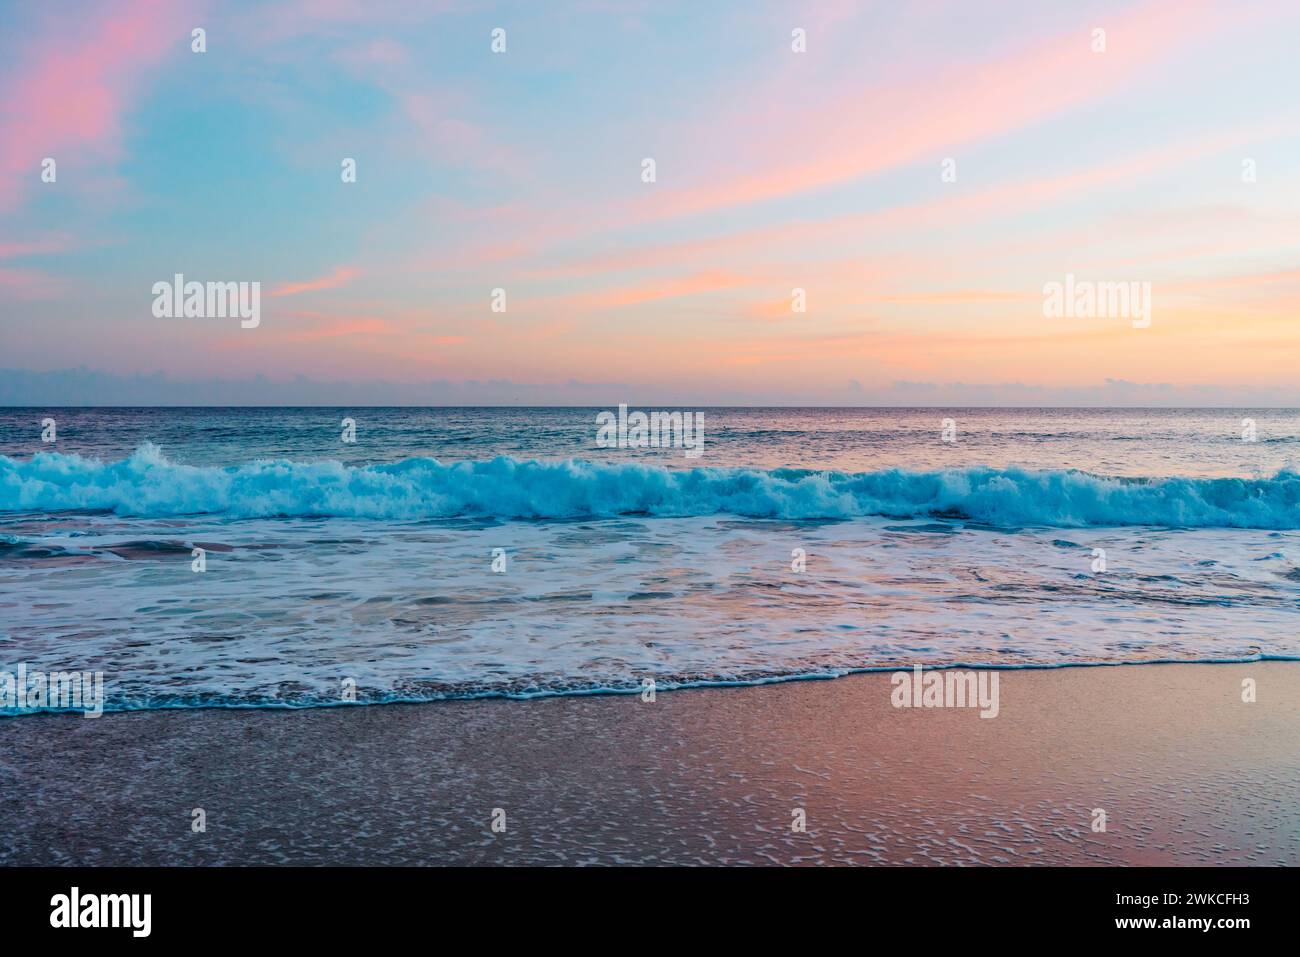 The sun sets over the tranquil beach, casting warm hues across the sky and reflecting its pink and golden glow on the gently lapping waves Stock Photo